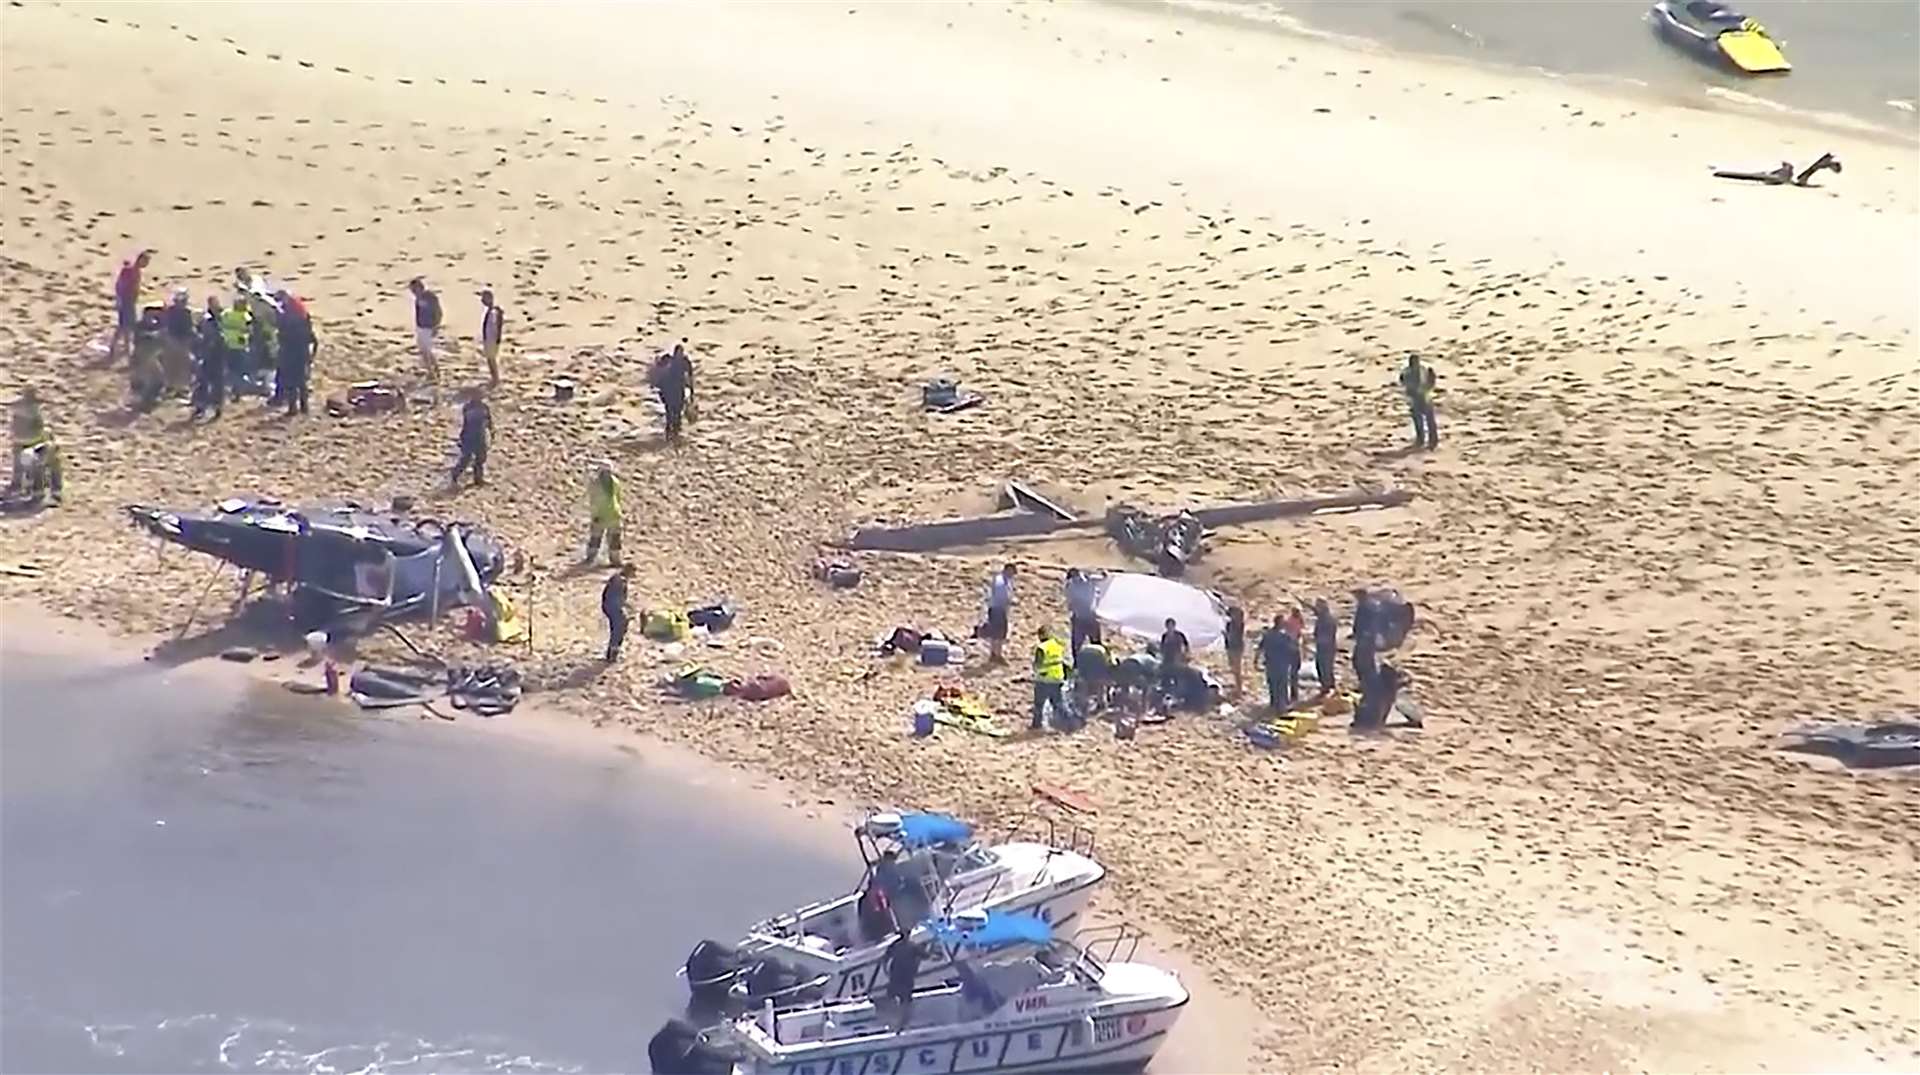 Emergency services at the scene on the Gold Coast (CH9/AP)